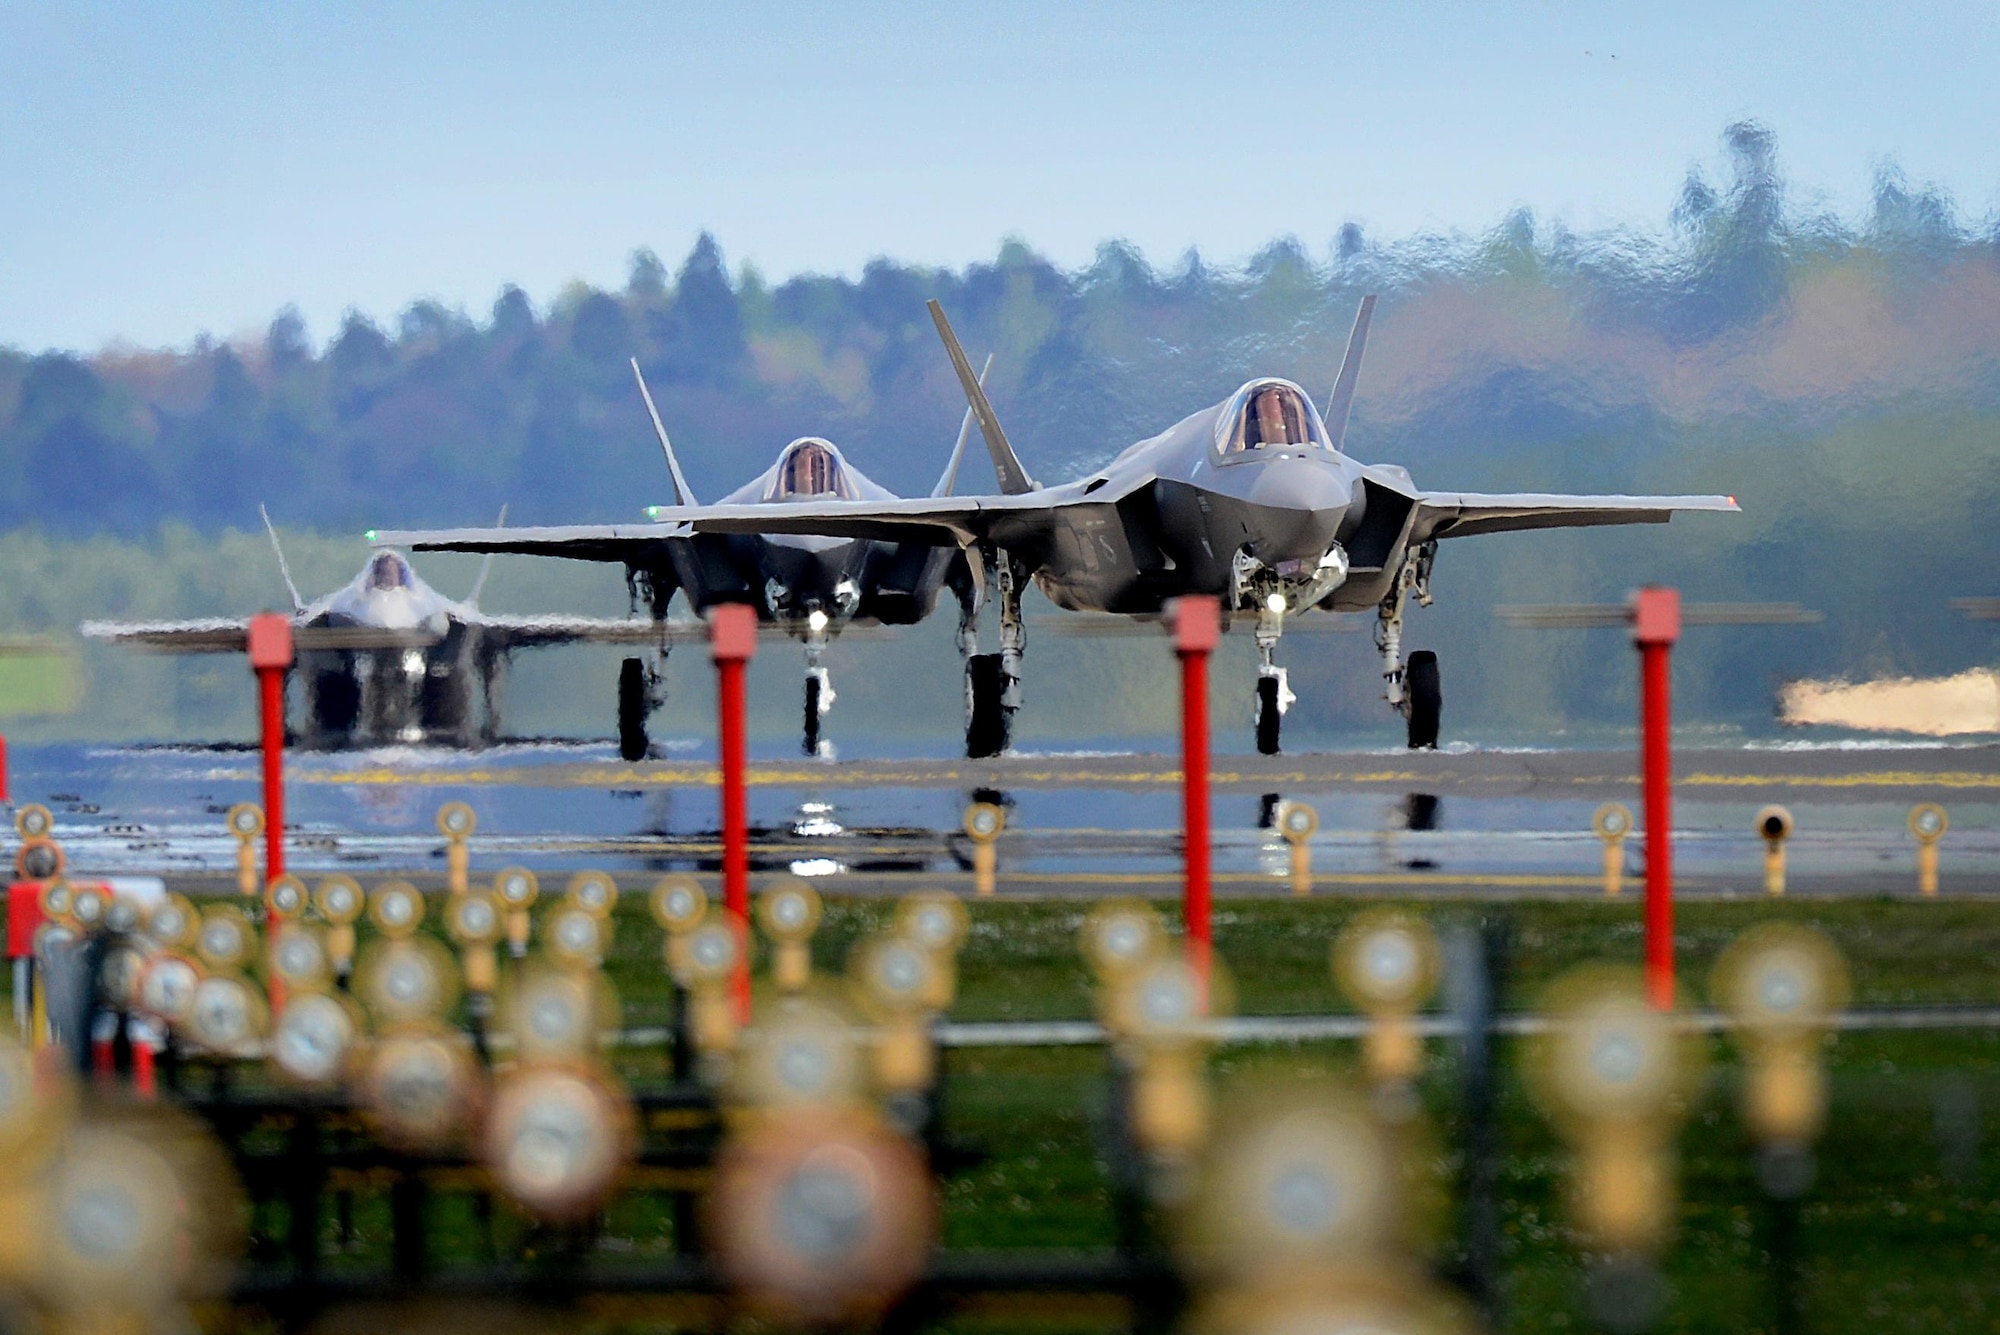 F-35A Lightning II's from the 34th Fighter Squadron at Hill Air Force Base, Utah, land at Royal Air Force Lakenheath, England, April 15, 2017. The aircraft arrival marks the first F-35A fighter training deployment to the U.S. European Command area of responsibility or any overseas location as a flying training deployment. (U.S. Air Force photo by Tech. Sgt. Matthew Plew)